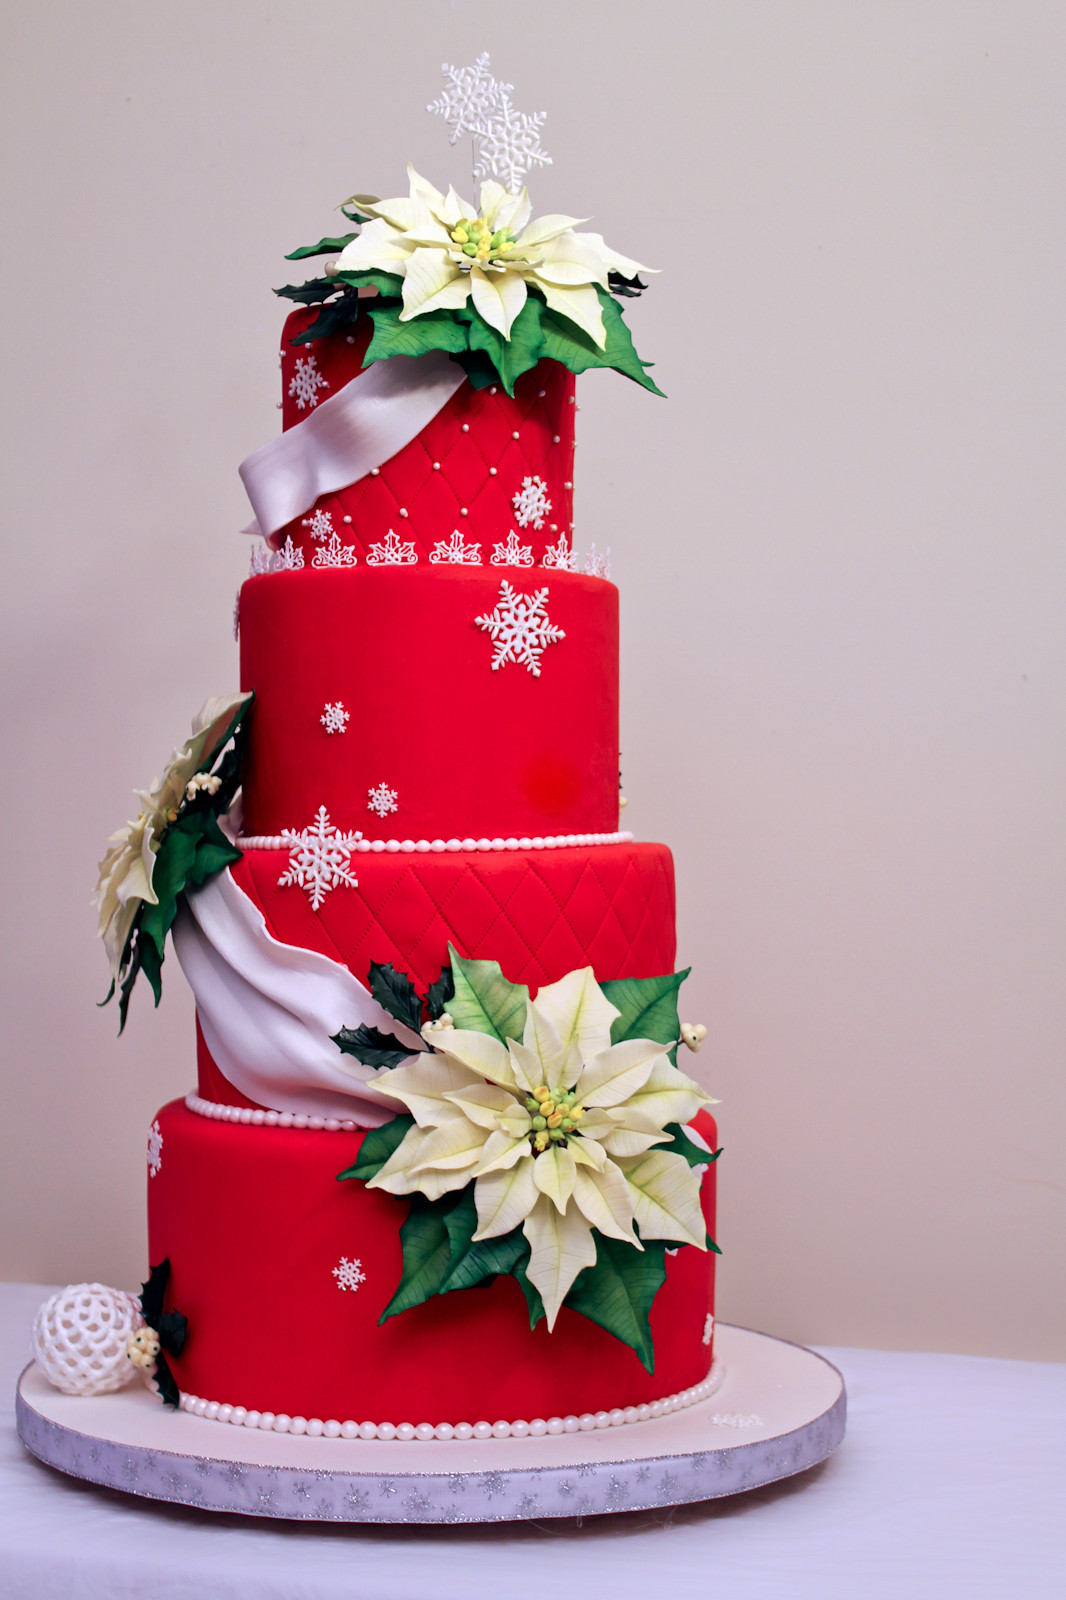 Christmas Cakes Pictures
 The Cake Engineer Holiday Poinsettia Cake